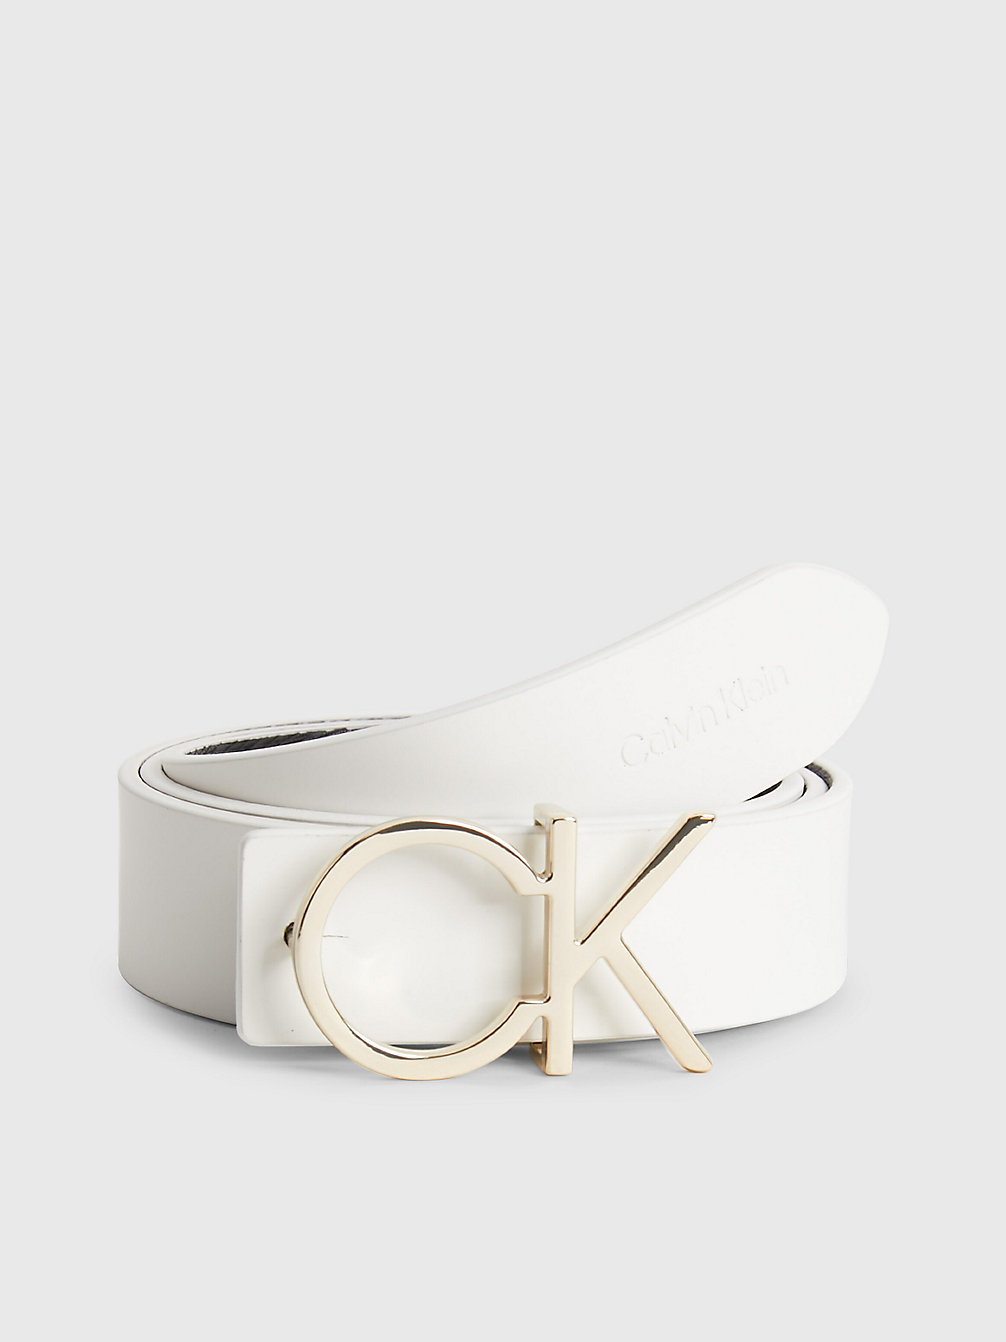 BRIGHT WHITE / BLACK MONO Recycled Reversible Leather Belt undefined women Calvin Klein